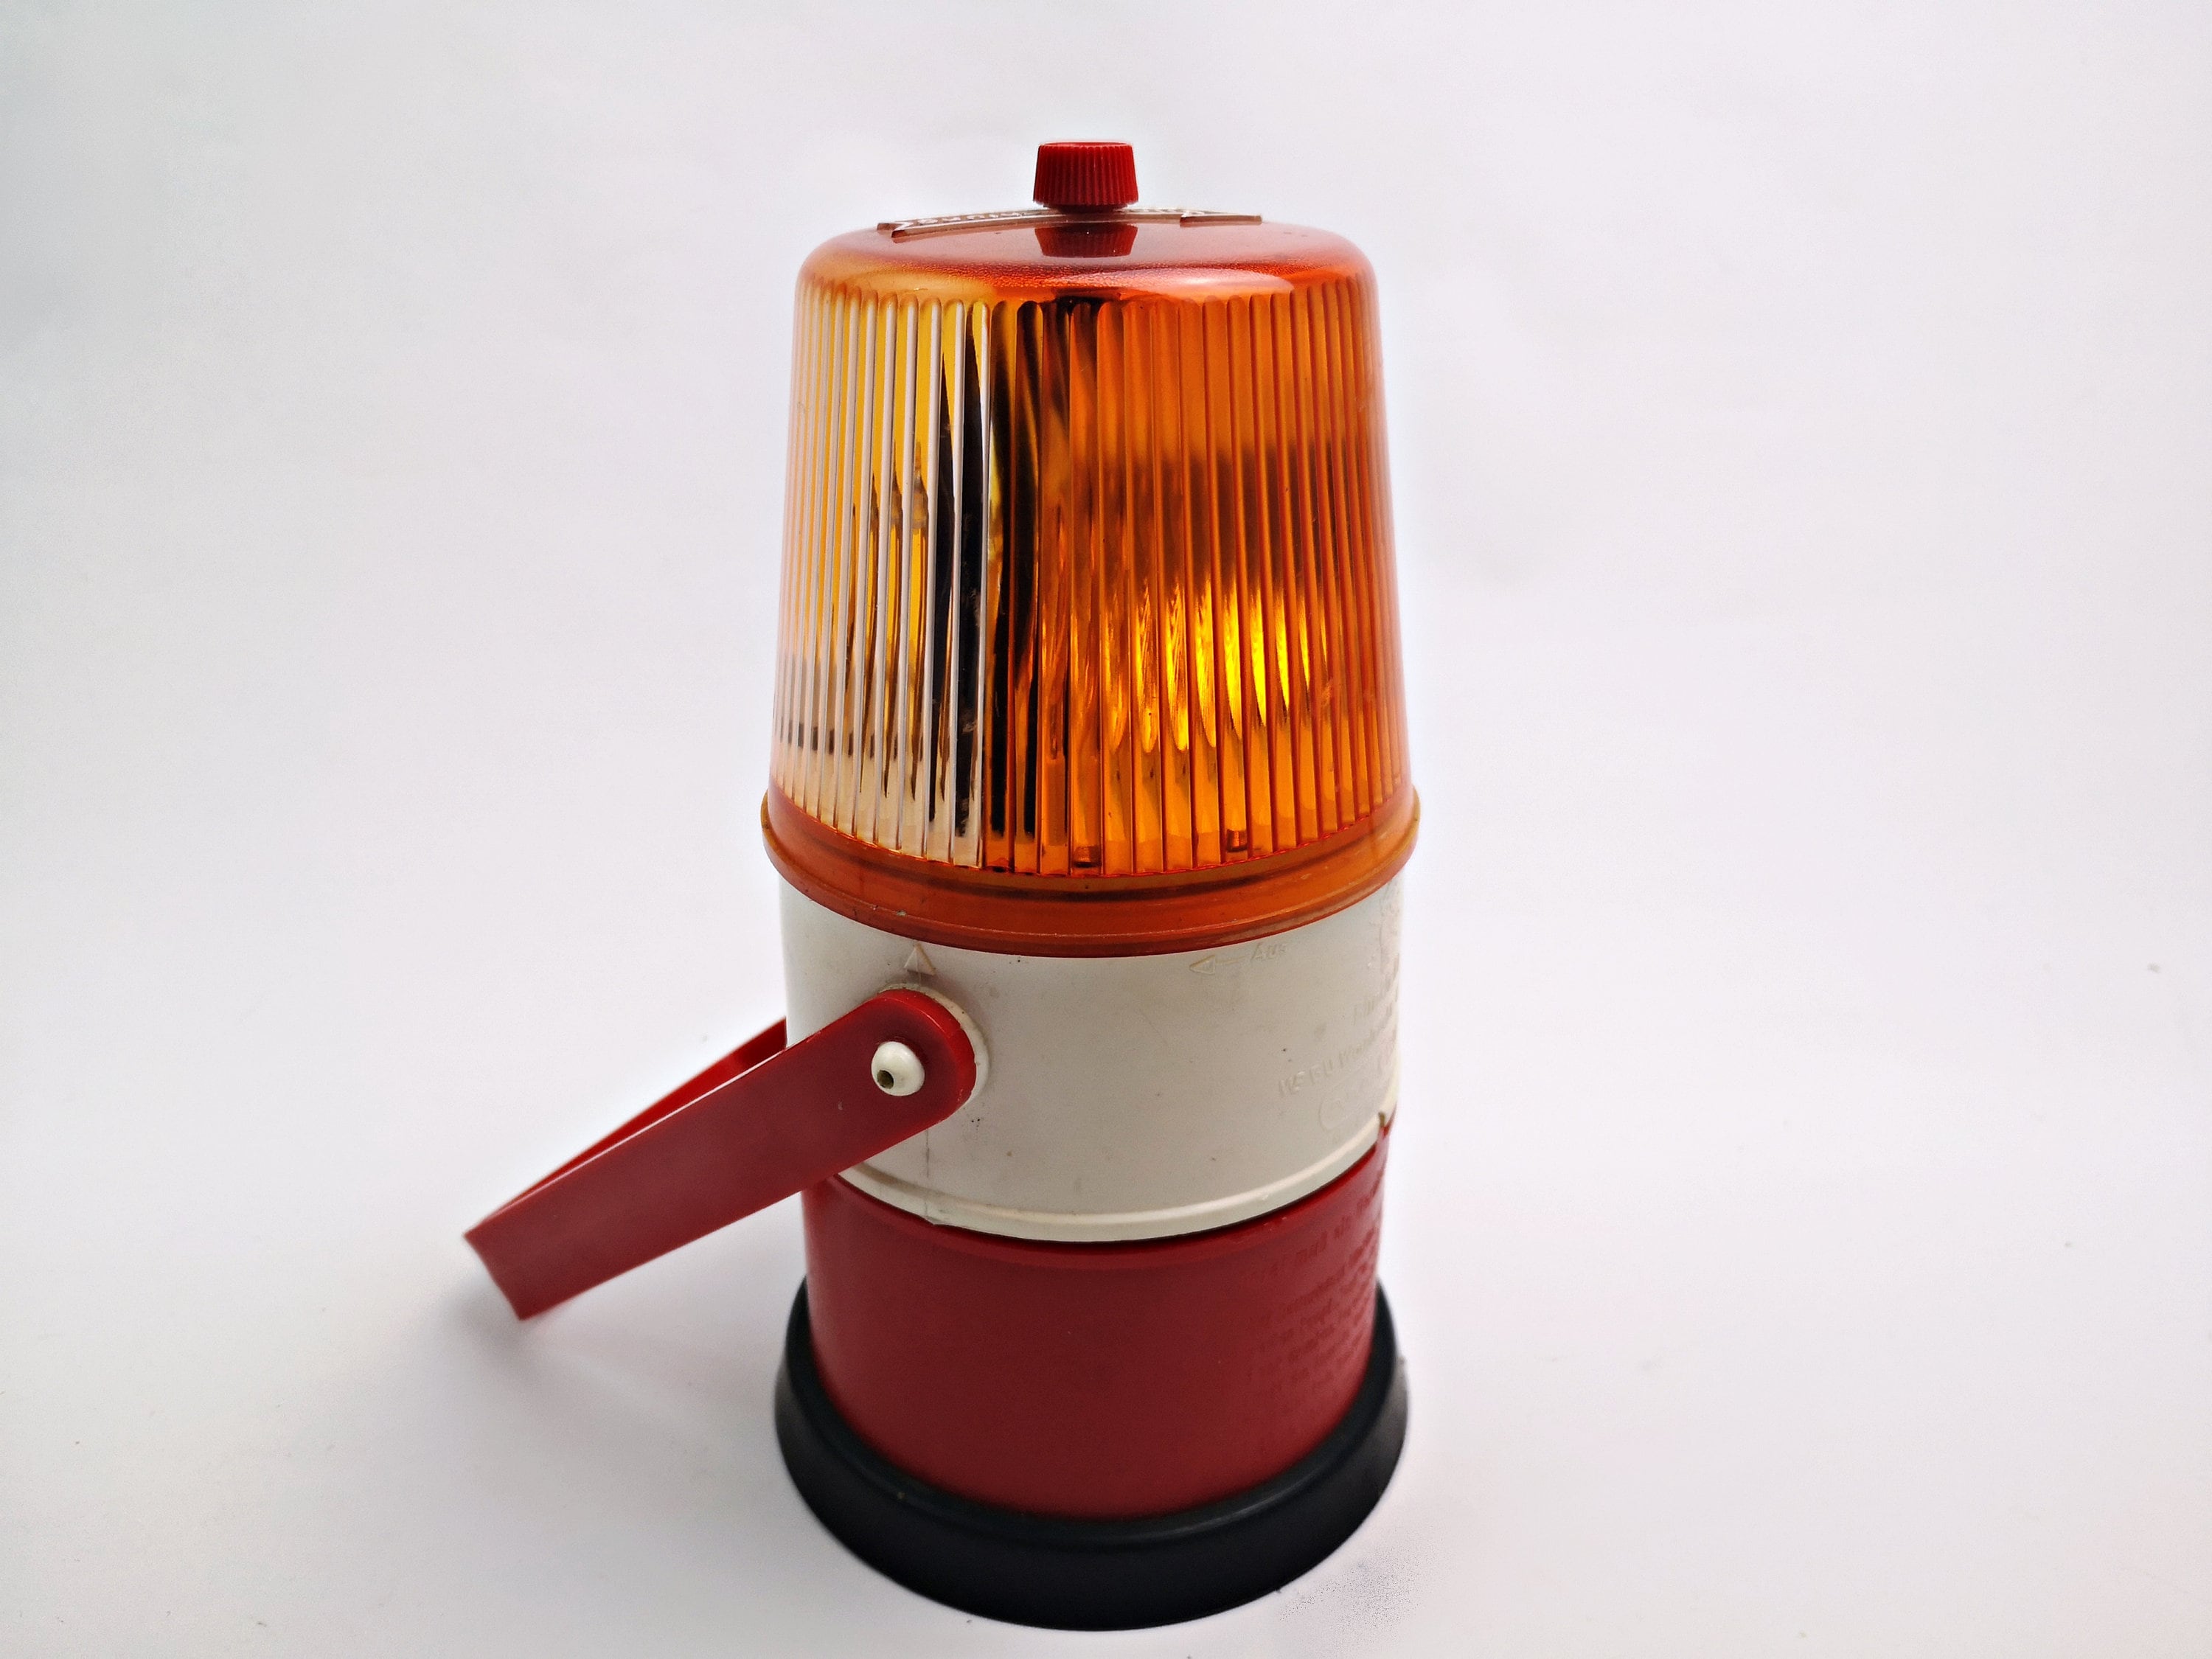 Vintage Warning Light / Intage Magnetic Car Emergency Light / Safety Towing  / Flashing or Steady / Made in Germany 